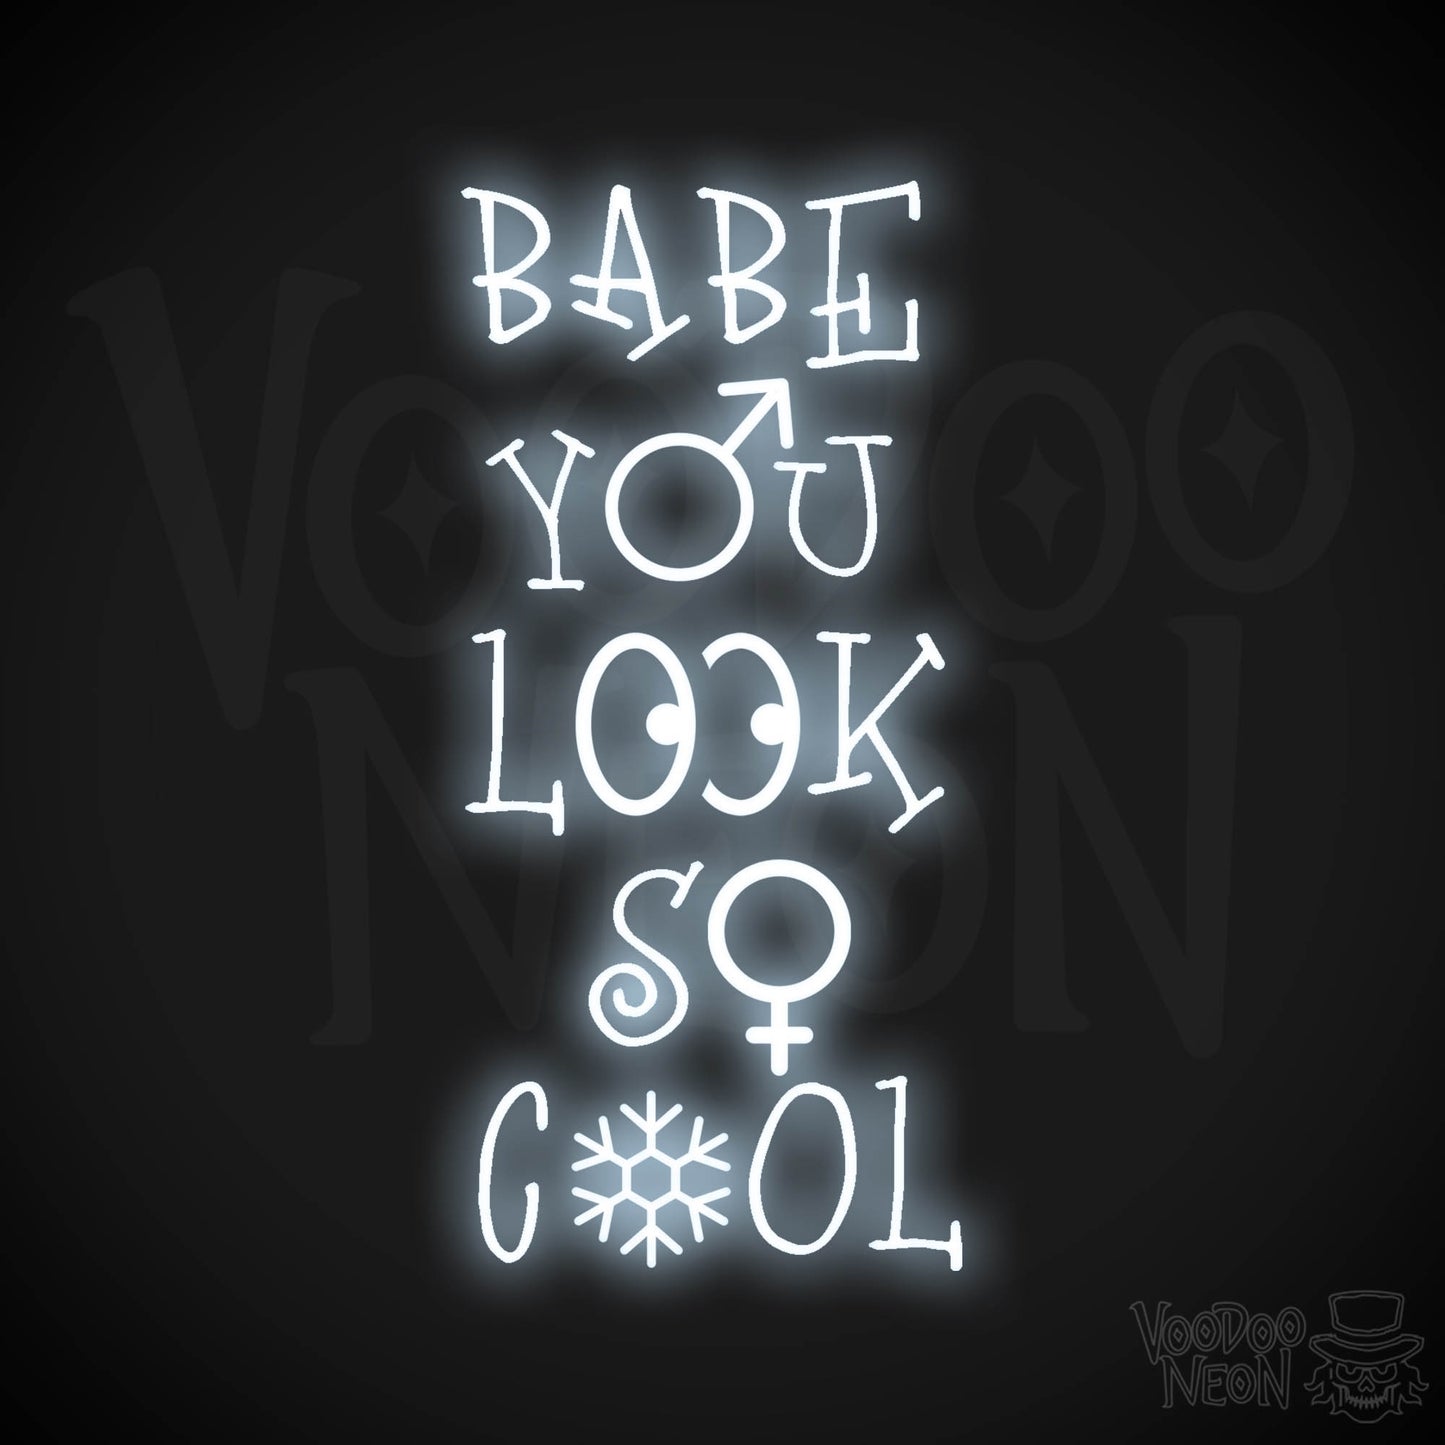 Babe You Look So Cool Neon Sign - LED Wall Art - Color Cool White